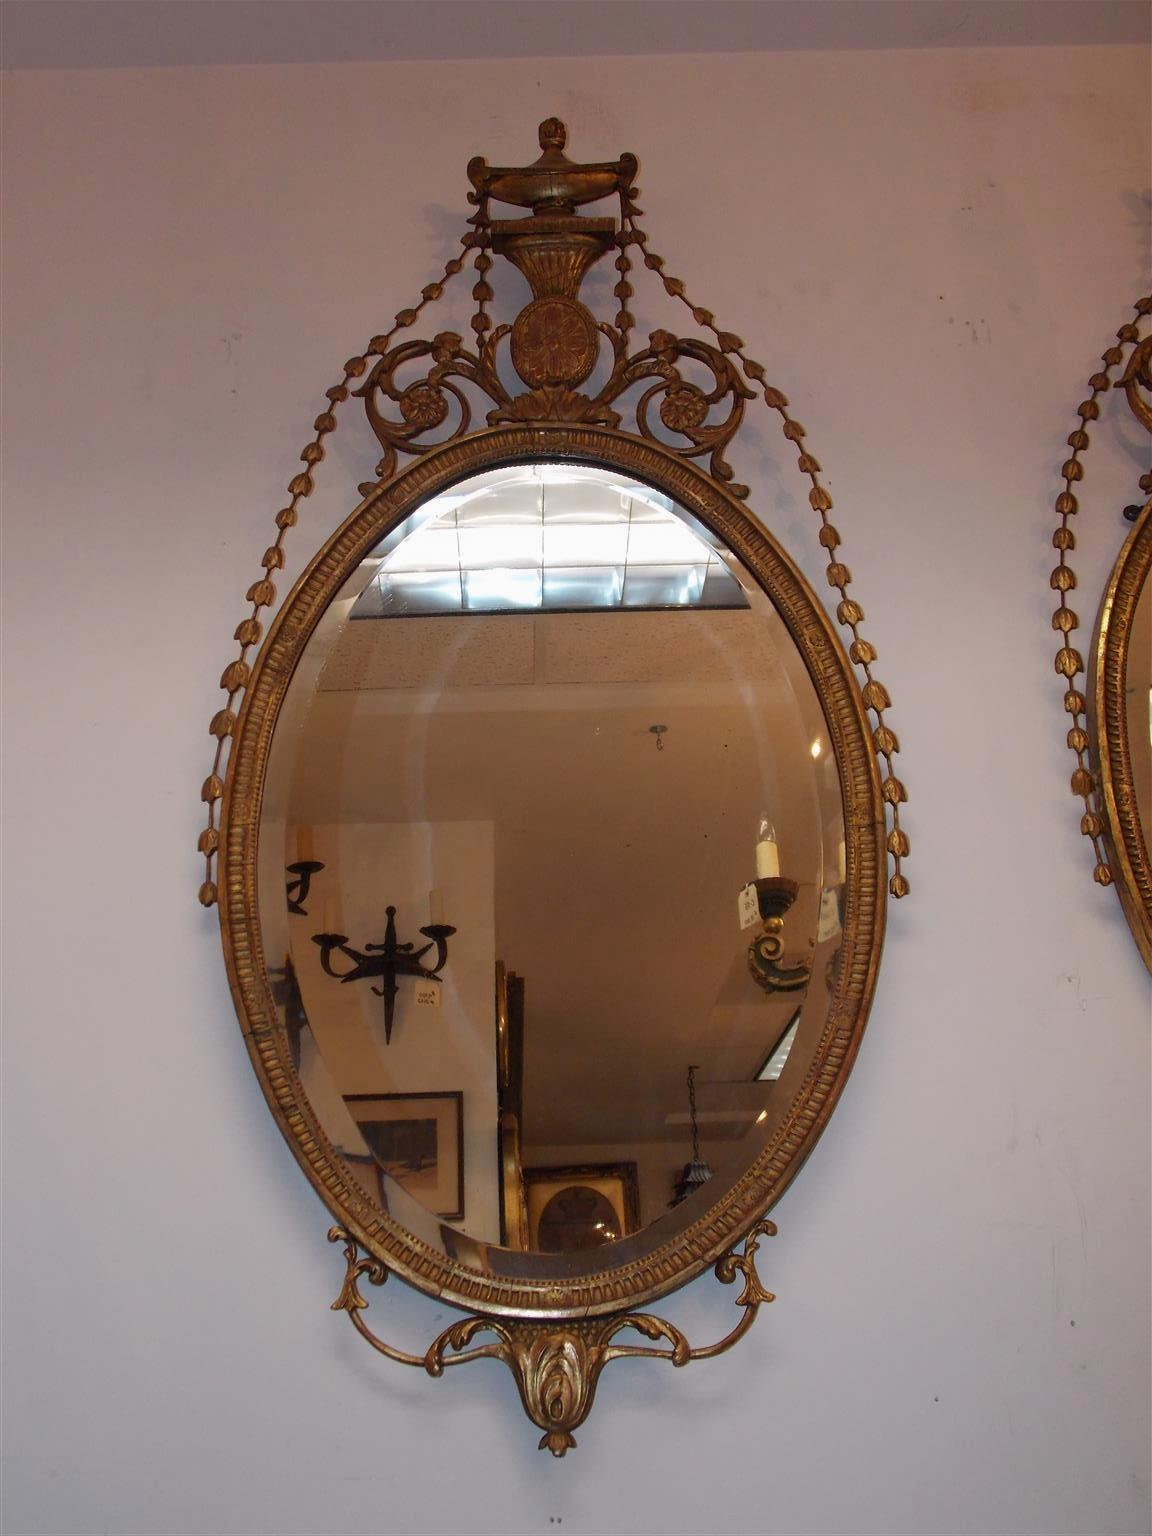 Pair of English Adam Oval Urn & Bell Flower Mirrors with Beveled Glass, C. 1800 For Sale 4